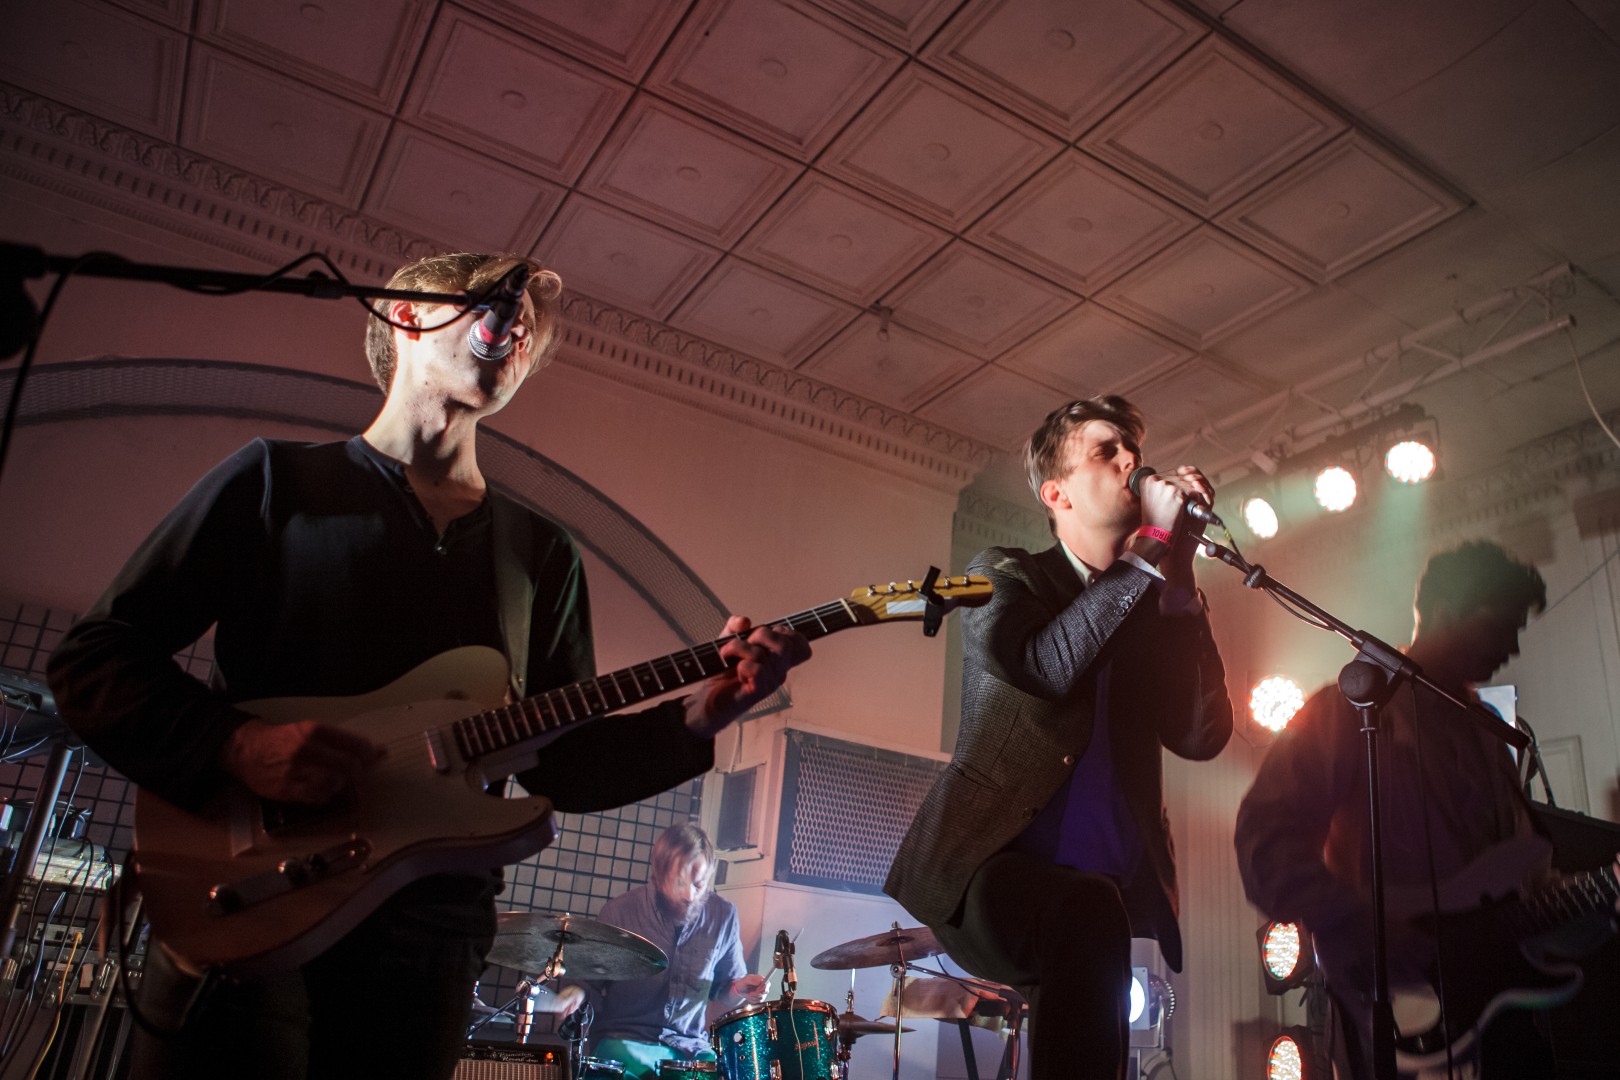 Efterklang at Control Club in Bucharest on November 13, 2013 (ef82e11ceb)